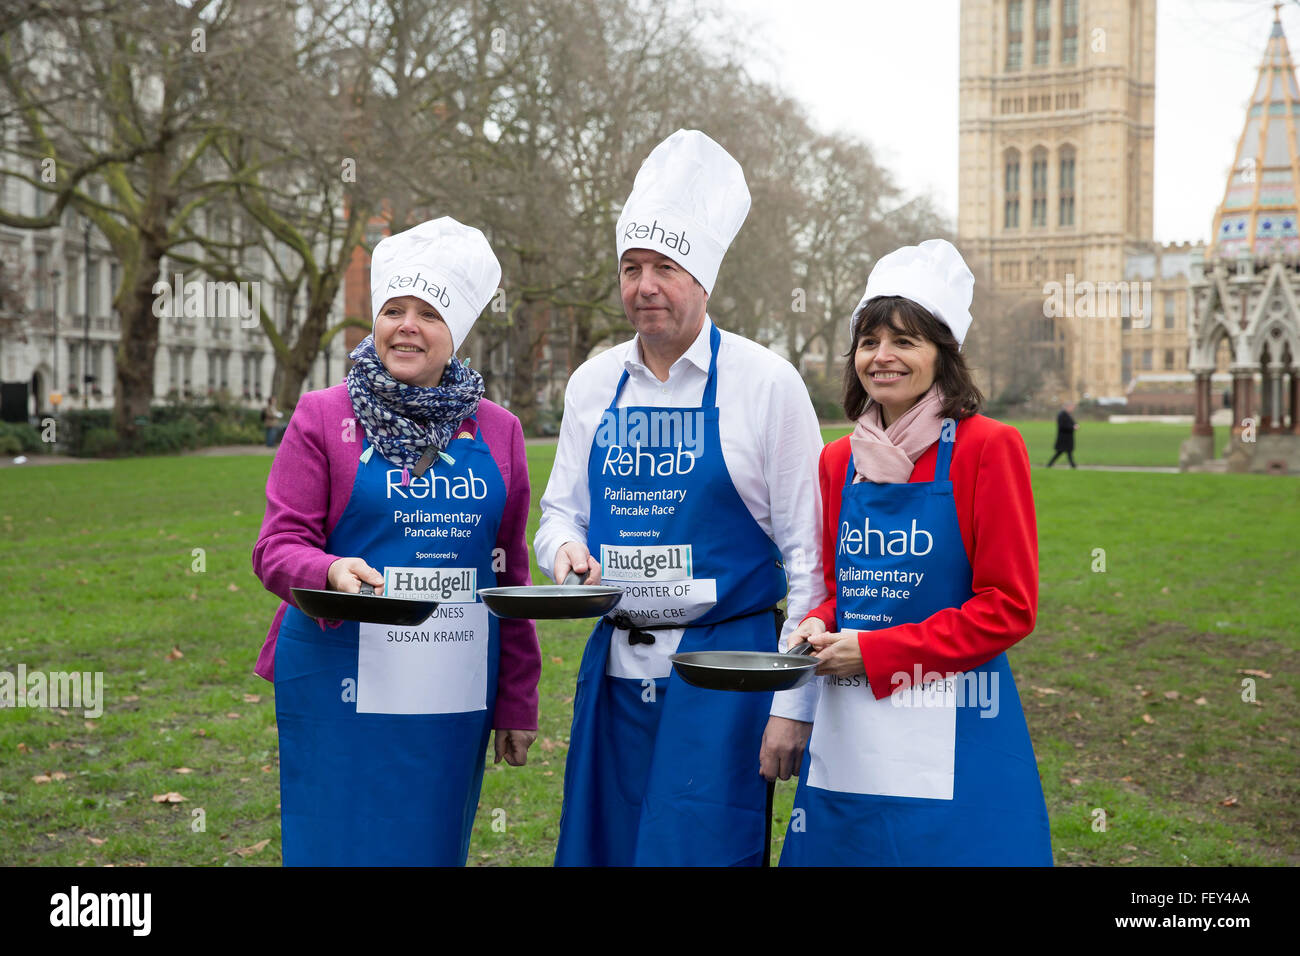 Westminster, London, UK. 9th February 2016. Baroness Susan Kramer, Lord Porter of Spalding and Baroness Parminter pose with their frying pans at the Rehab Parliamentary Pancake Race 2016 Credit:  Keith Larby/Alamy Live News Stock Photo